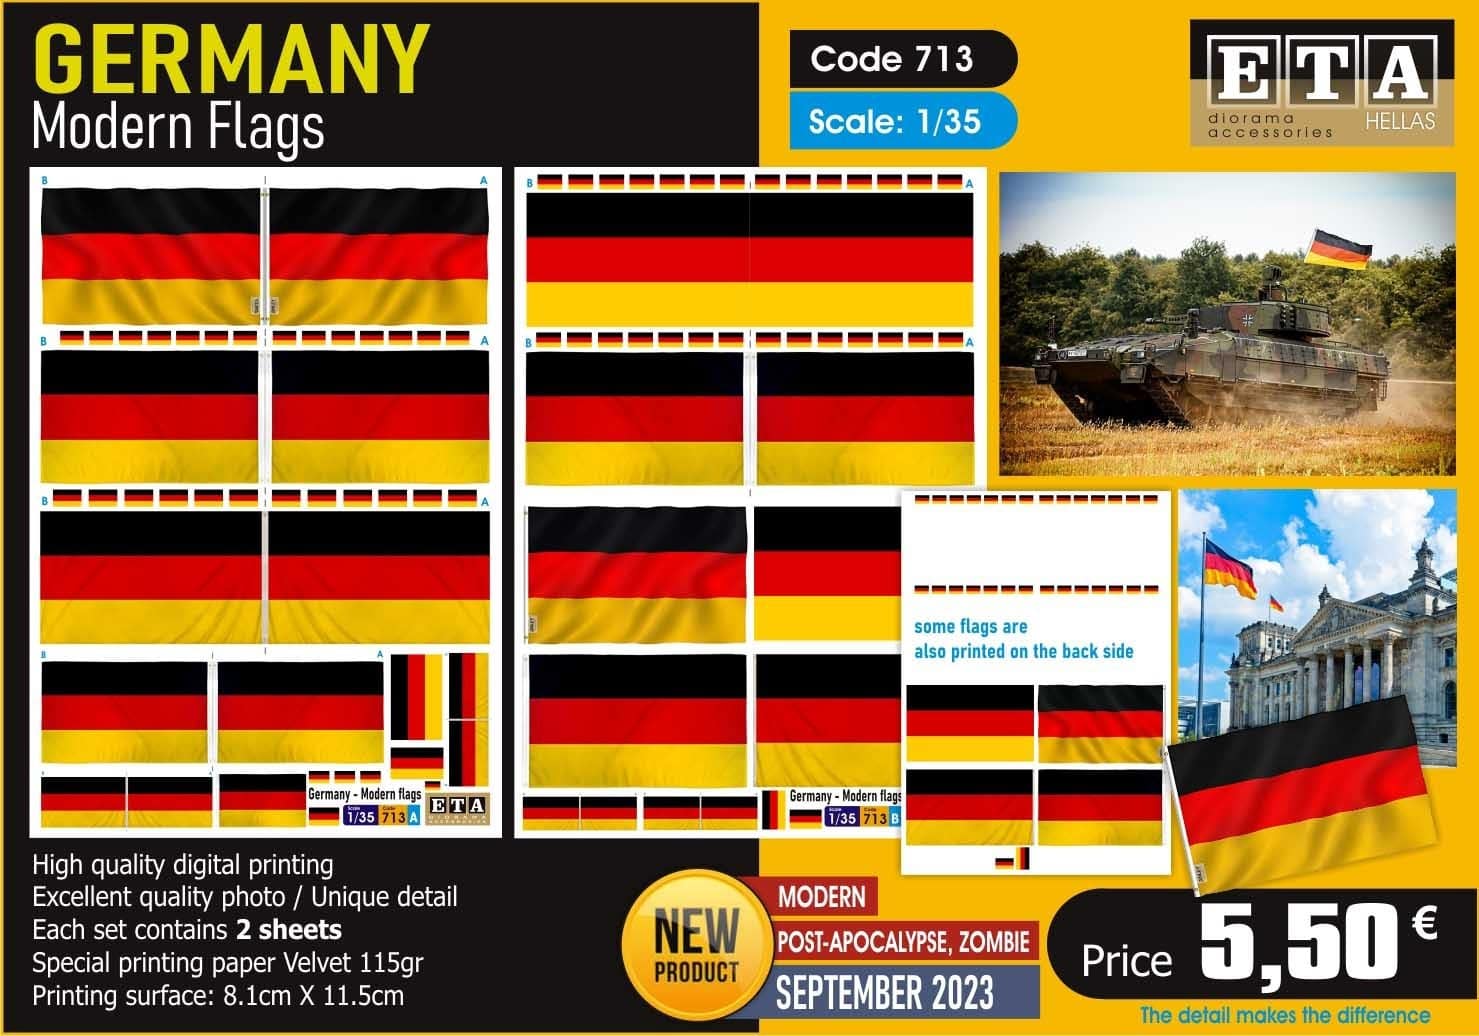 ETA Diorama Releases New 1-35 Scale Maps and Germany Modern Flags